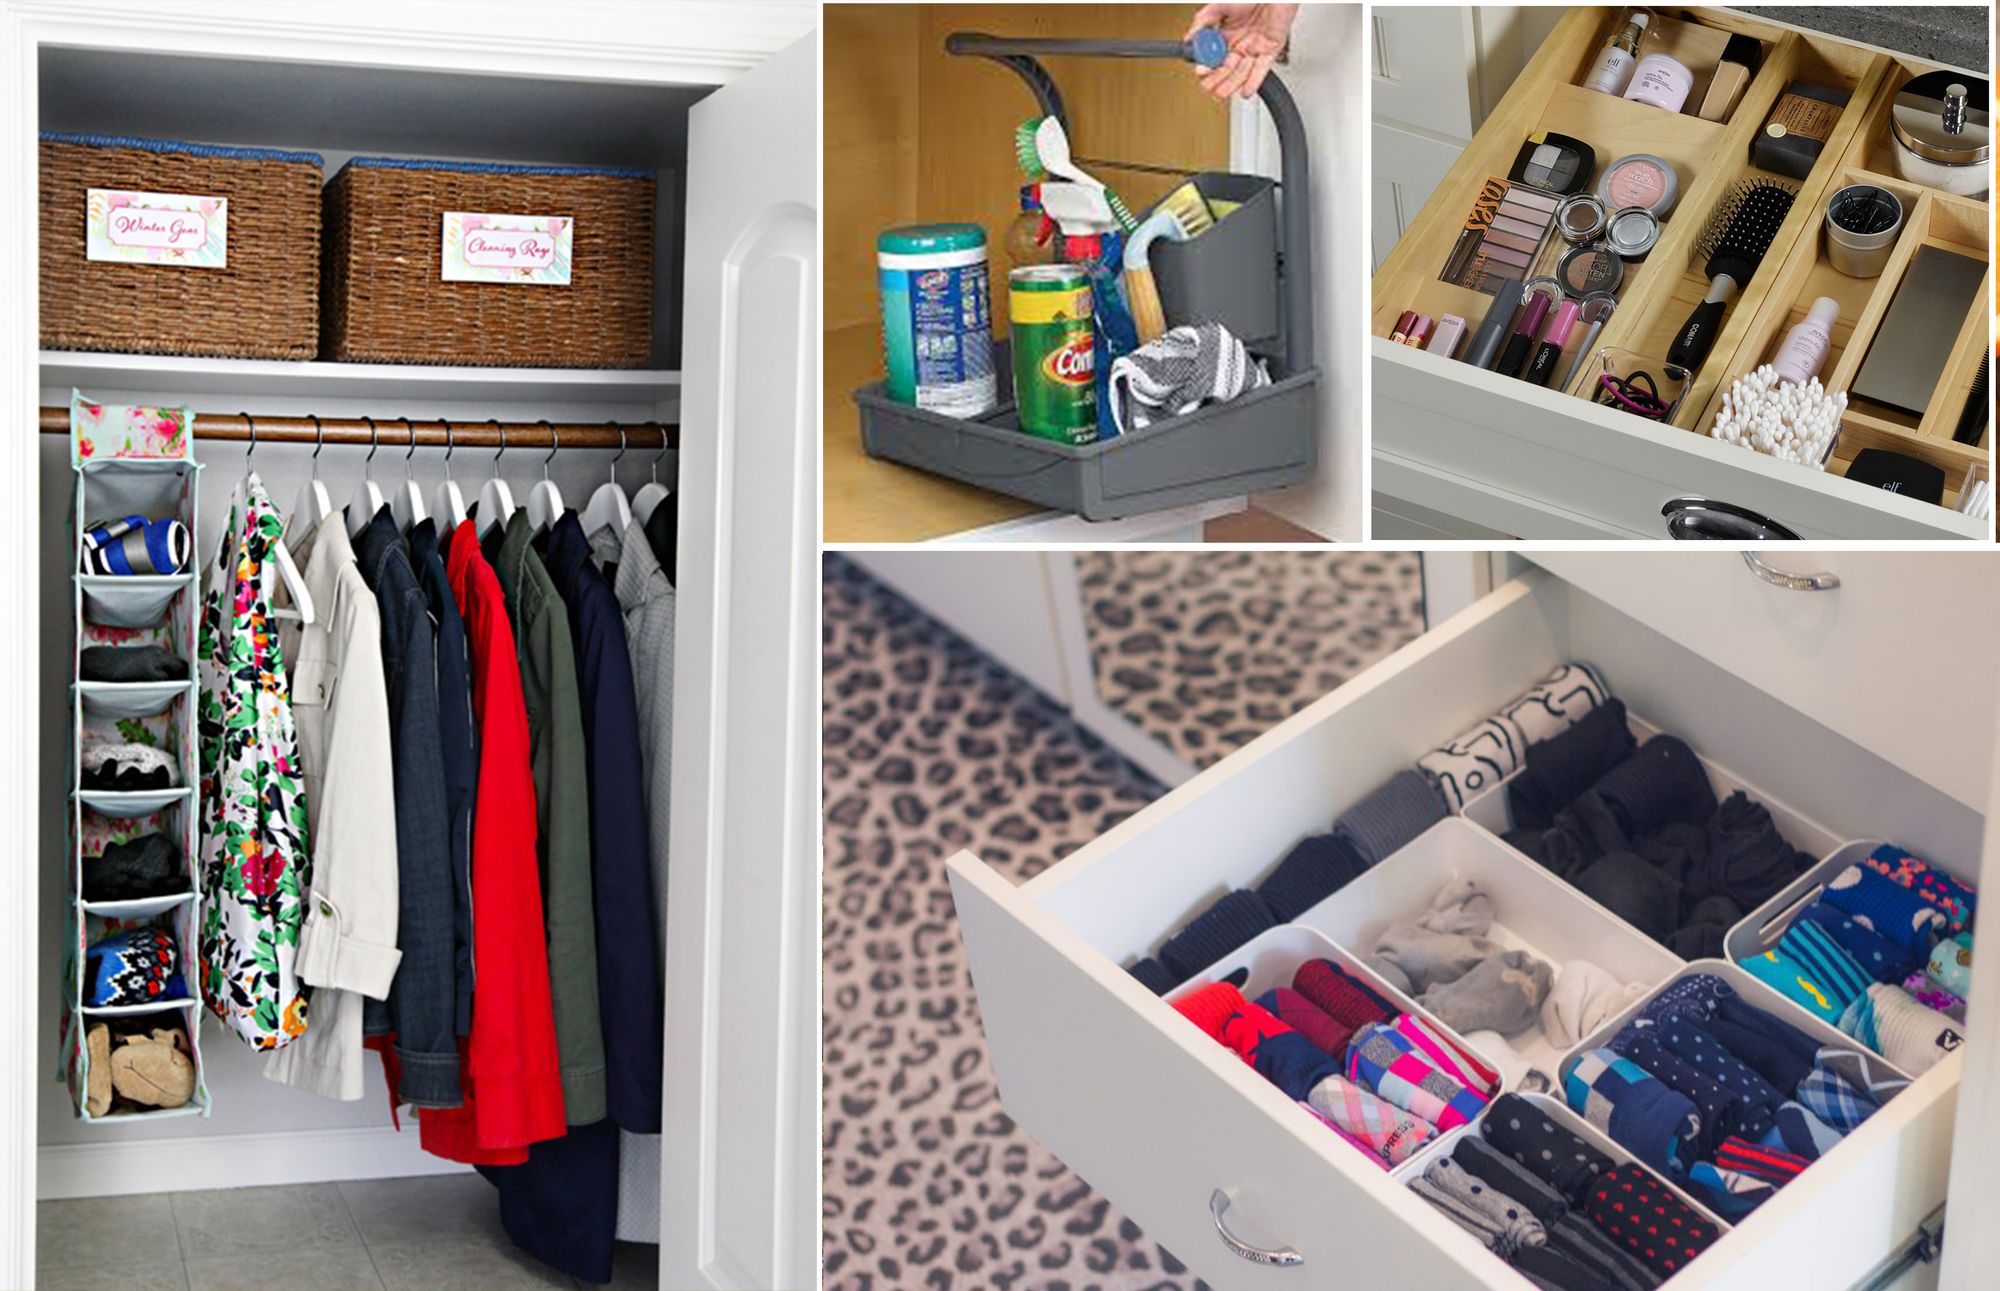 Start Off The New Year Right: 7 Small Areas to Declutter and Organize Your Home